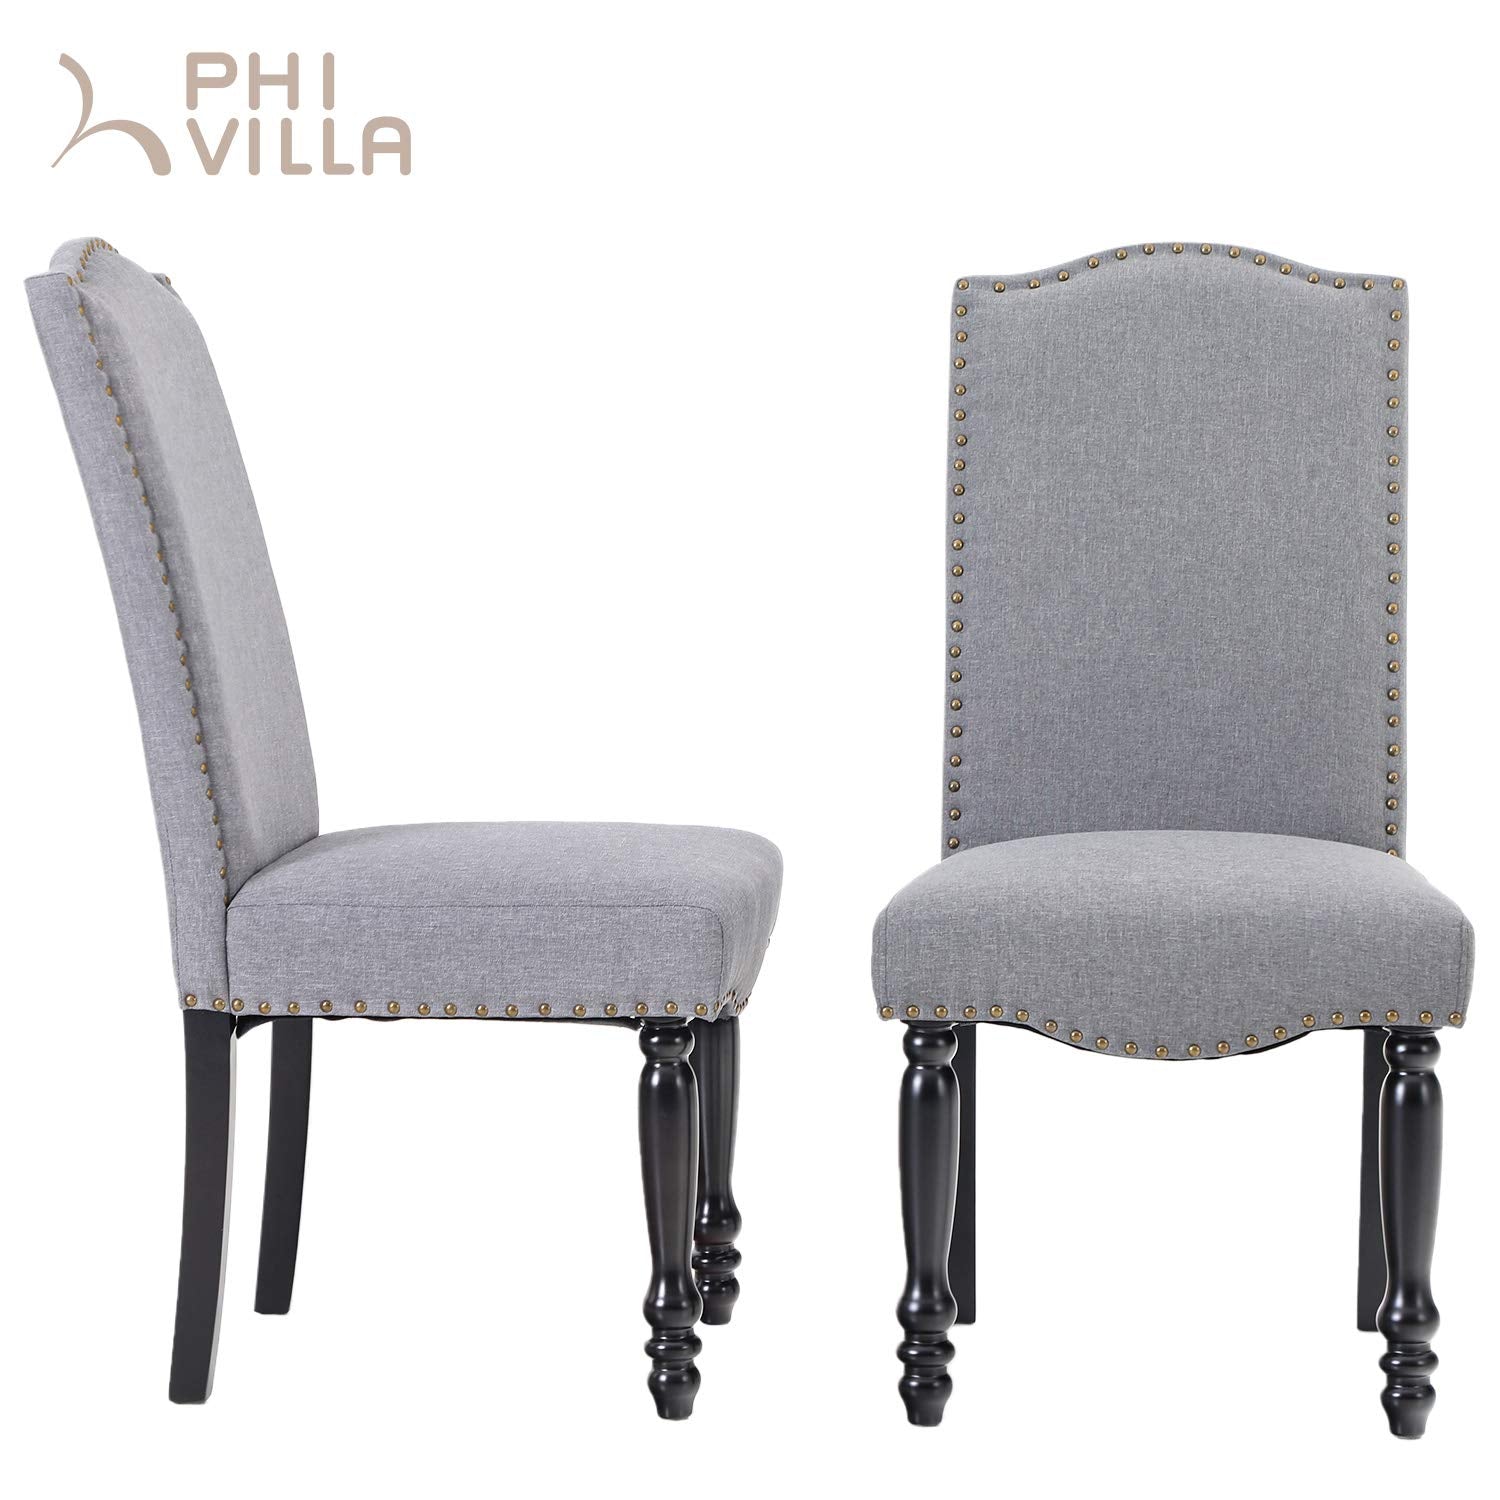 PHI VILLA Parson Urban Style Textile Accent Living Room Dining Chairs with Solid Wood Legs, Set of 2